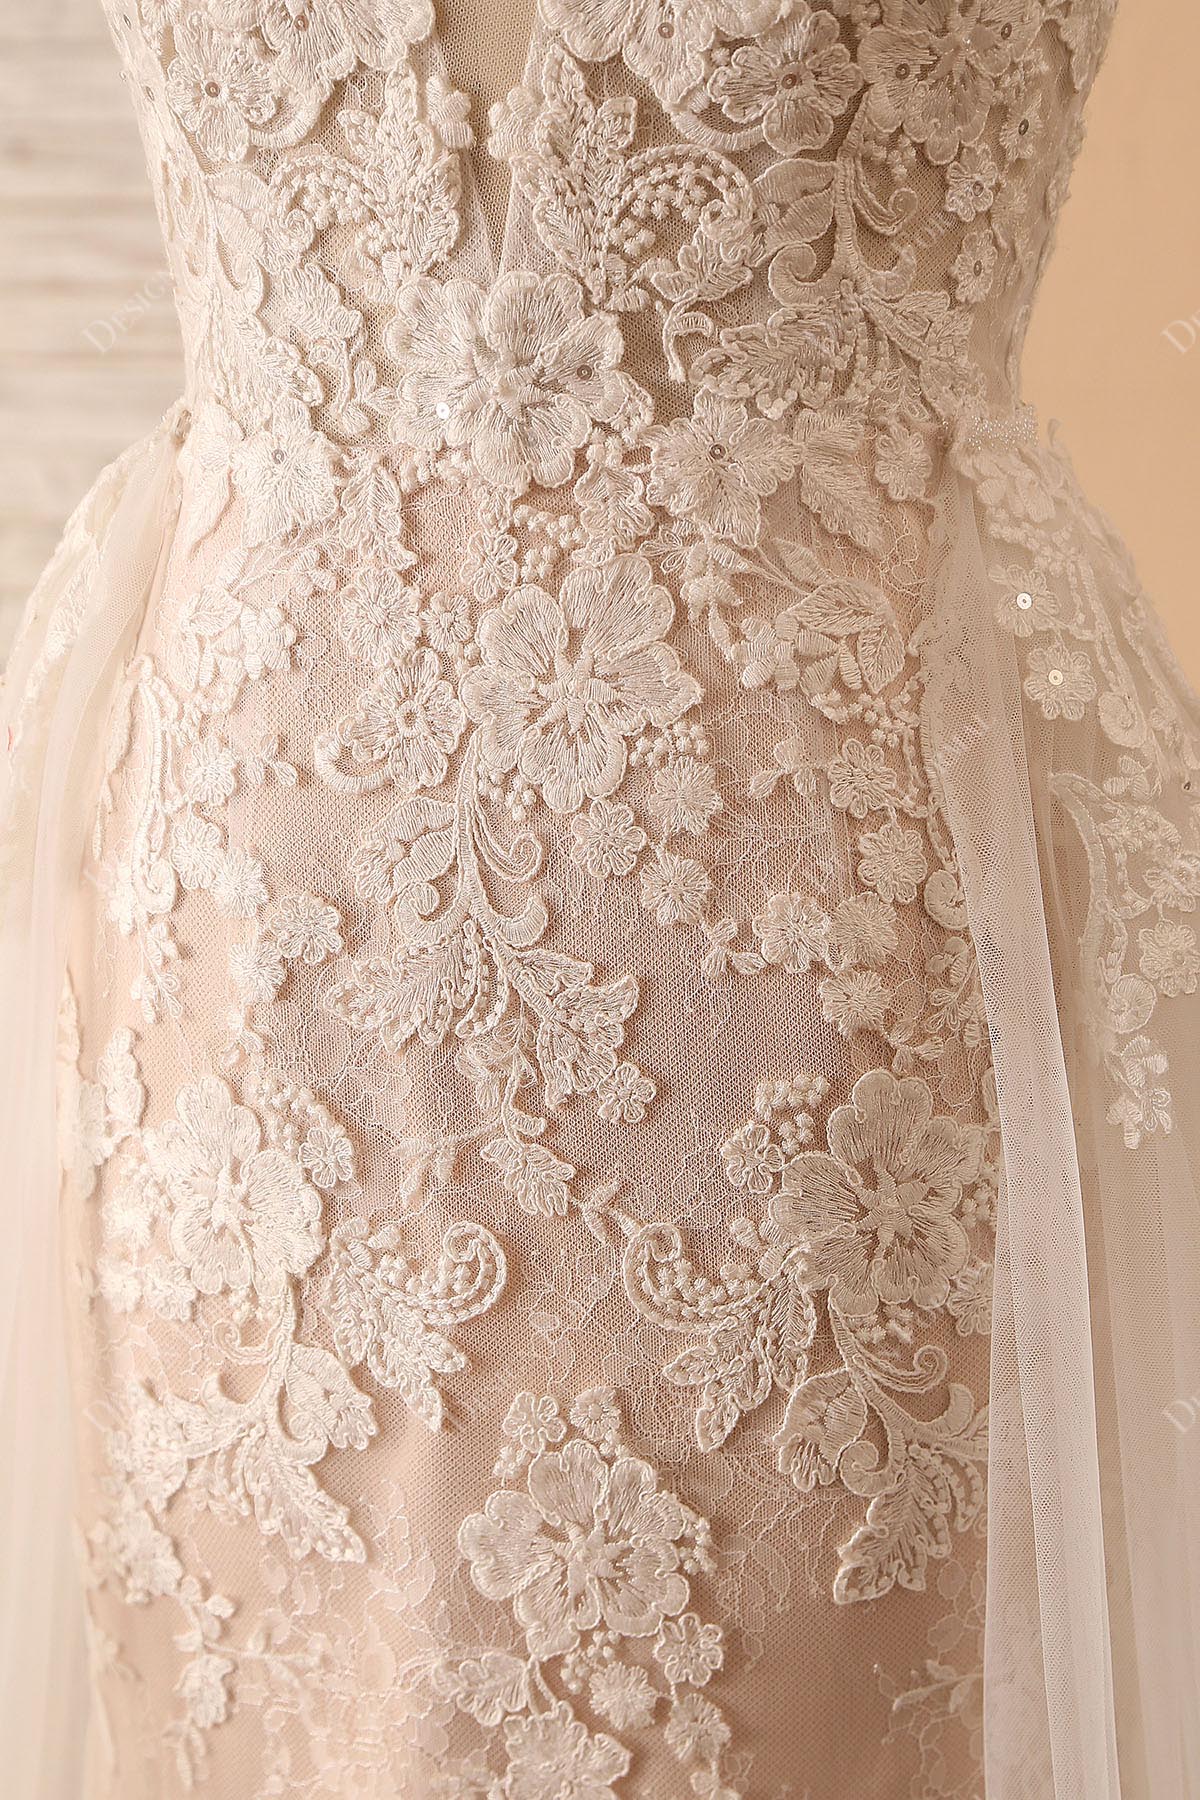 floral lace dress with overskirt